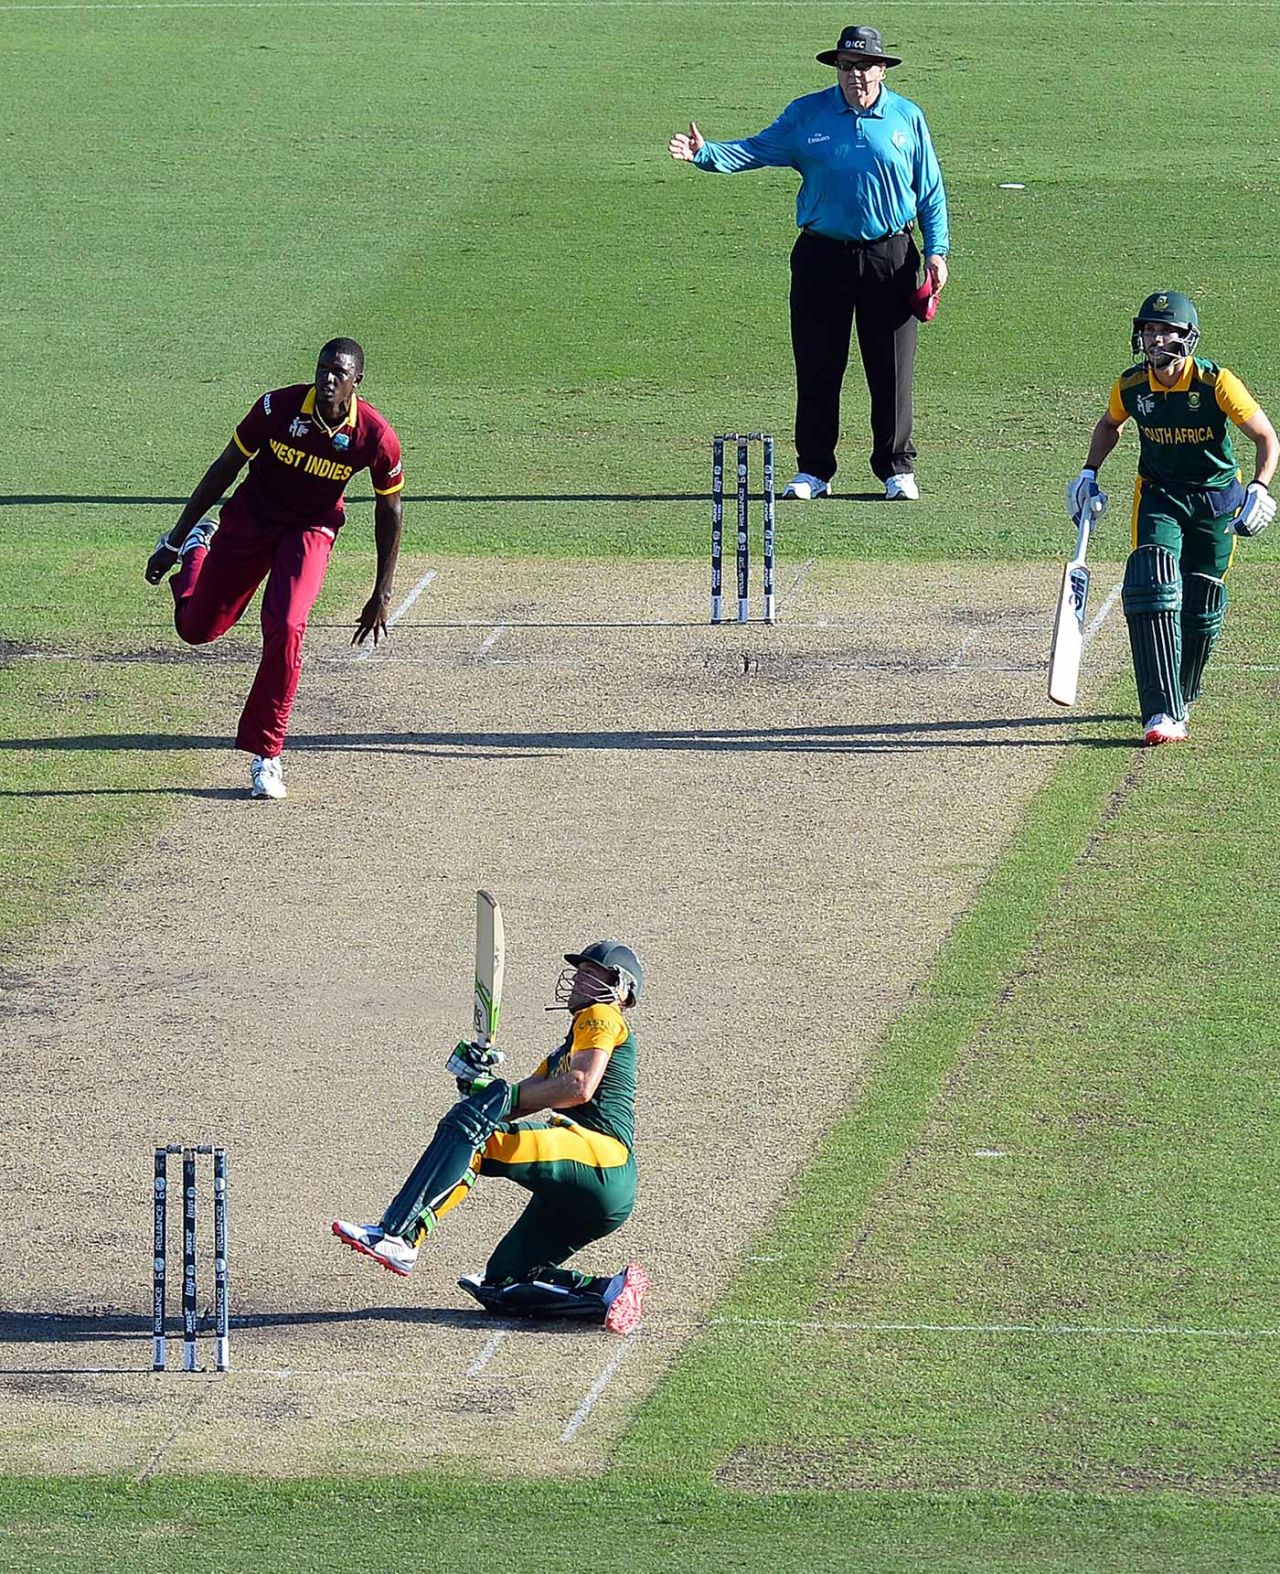 AB de Villiers scoops one over fine leg, South Africa v West Indies, World Cup 2015, Group B, Sydney, February 27, 2015